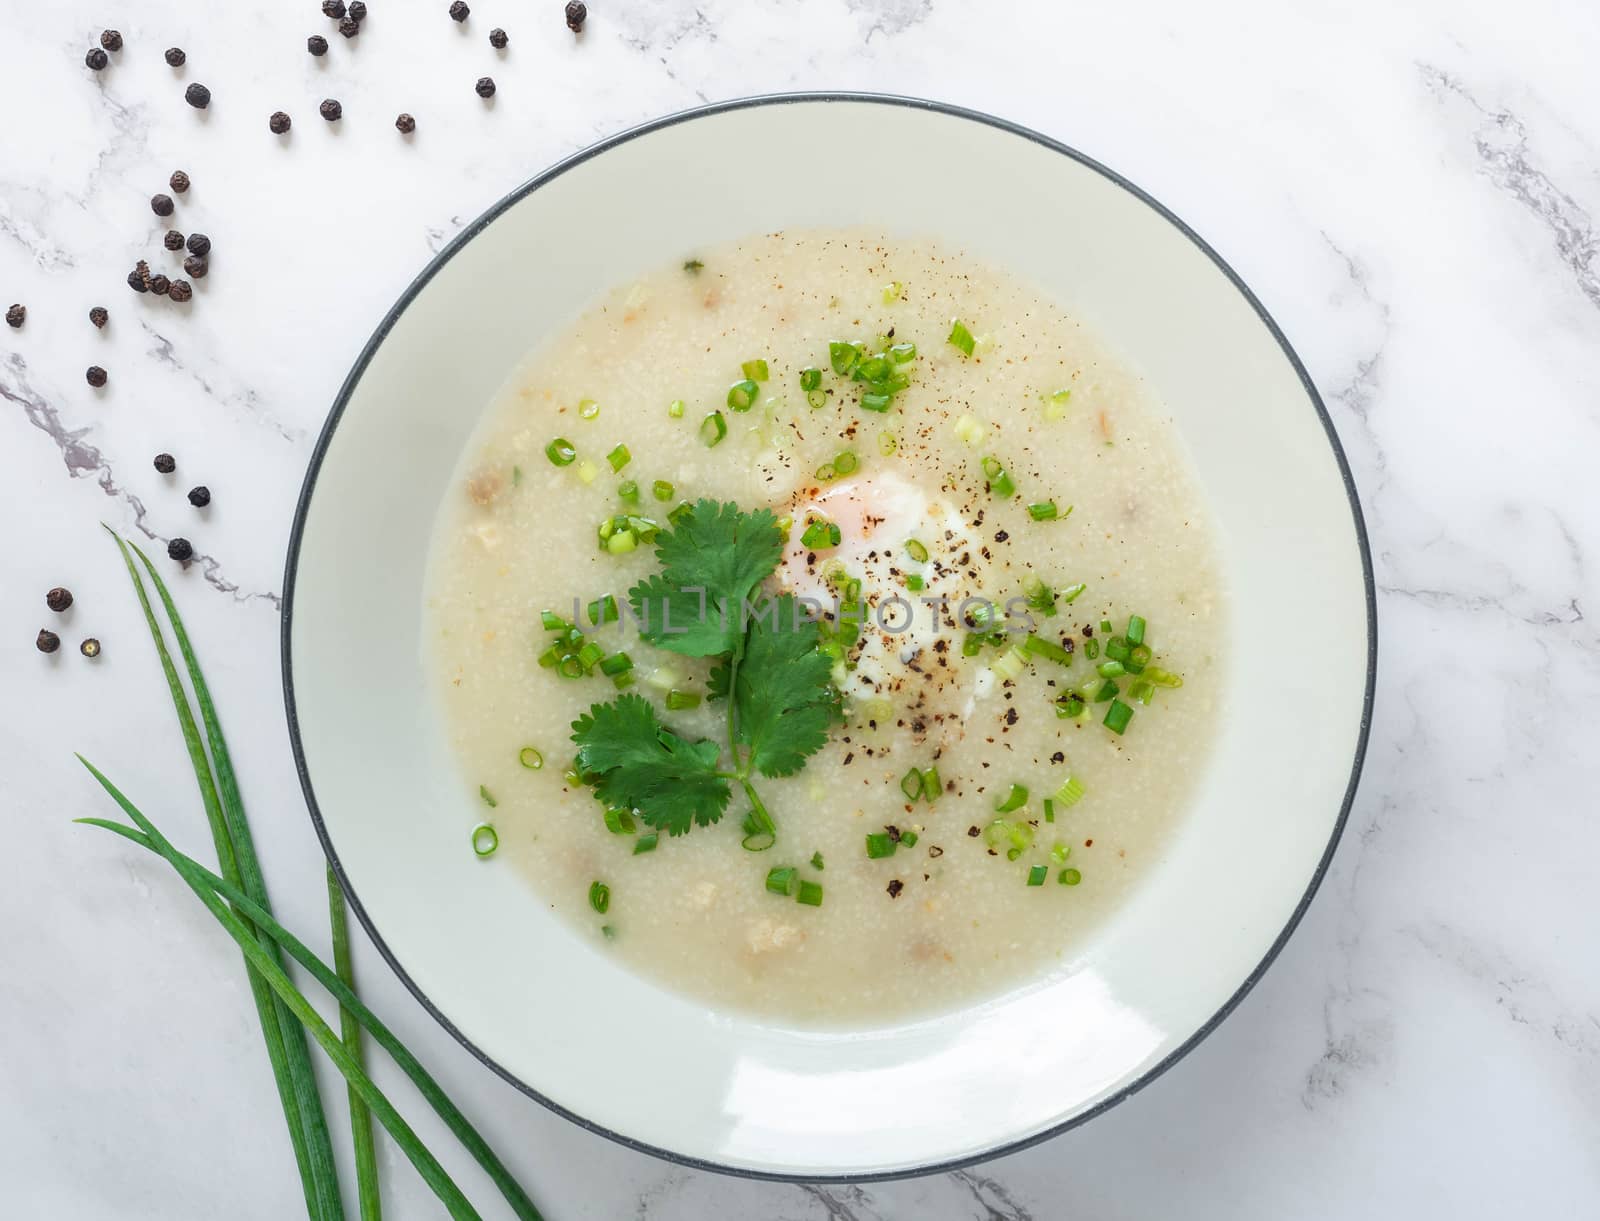 Porridge rice,Ingredients Pepper,Minced pork,Spring onion,Coriander and egg,
Is a healthy food,White background